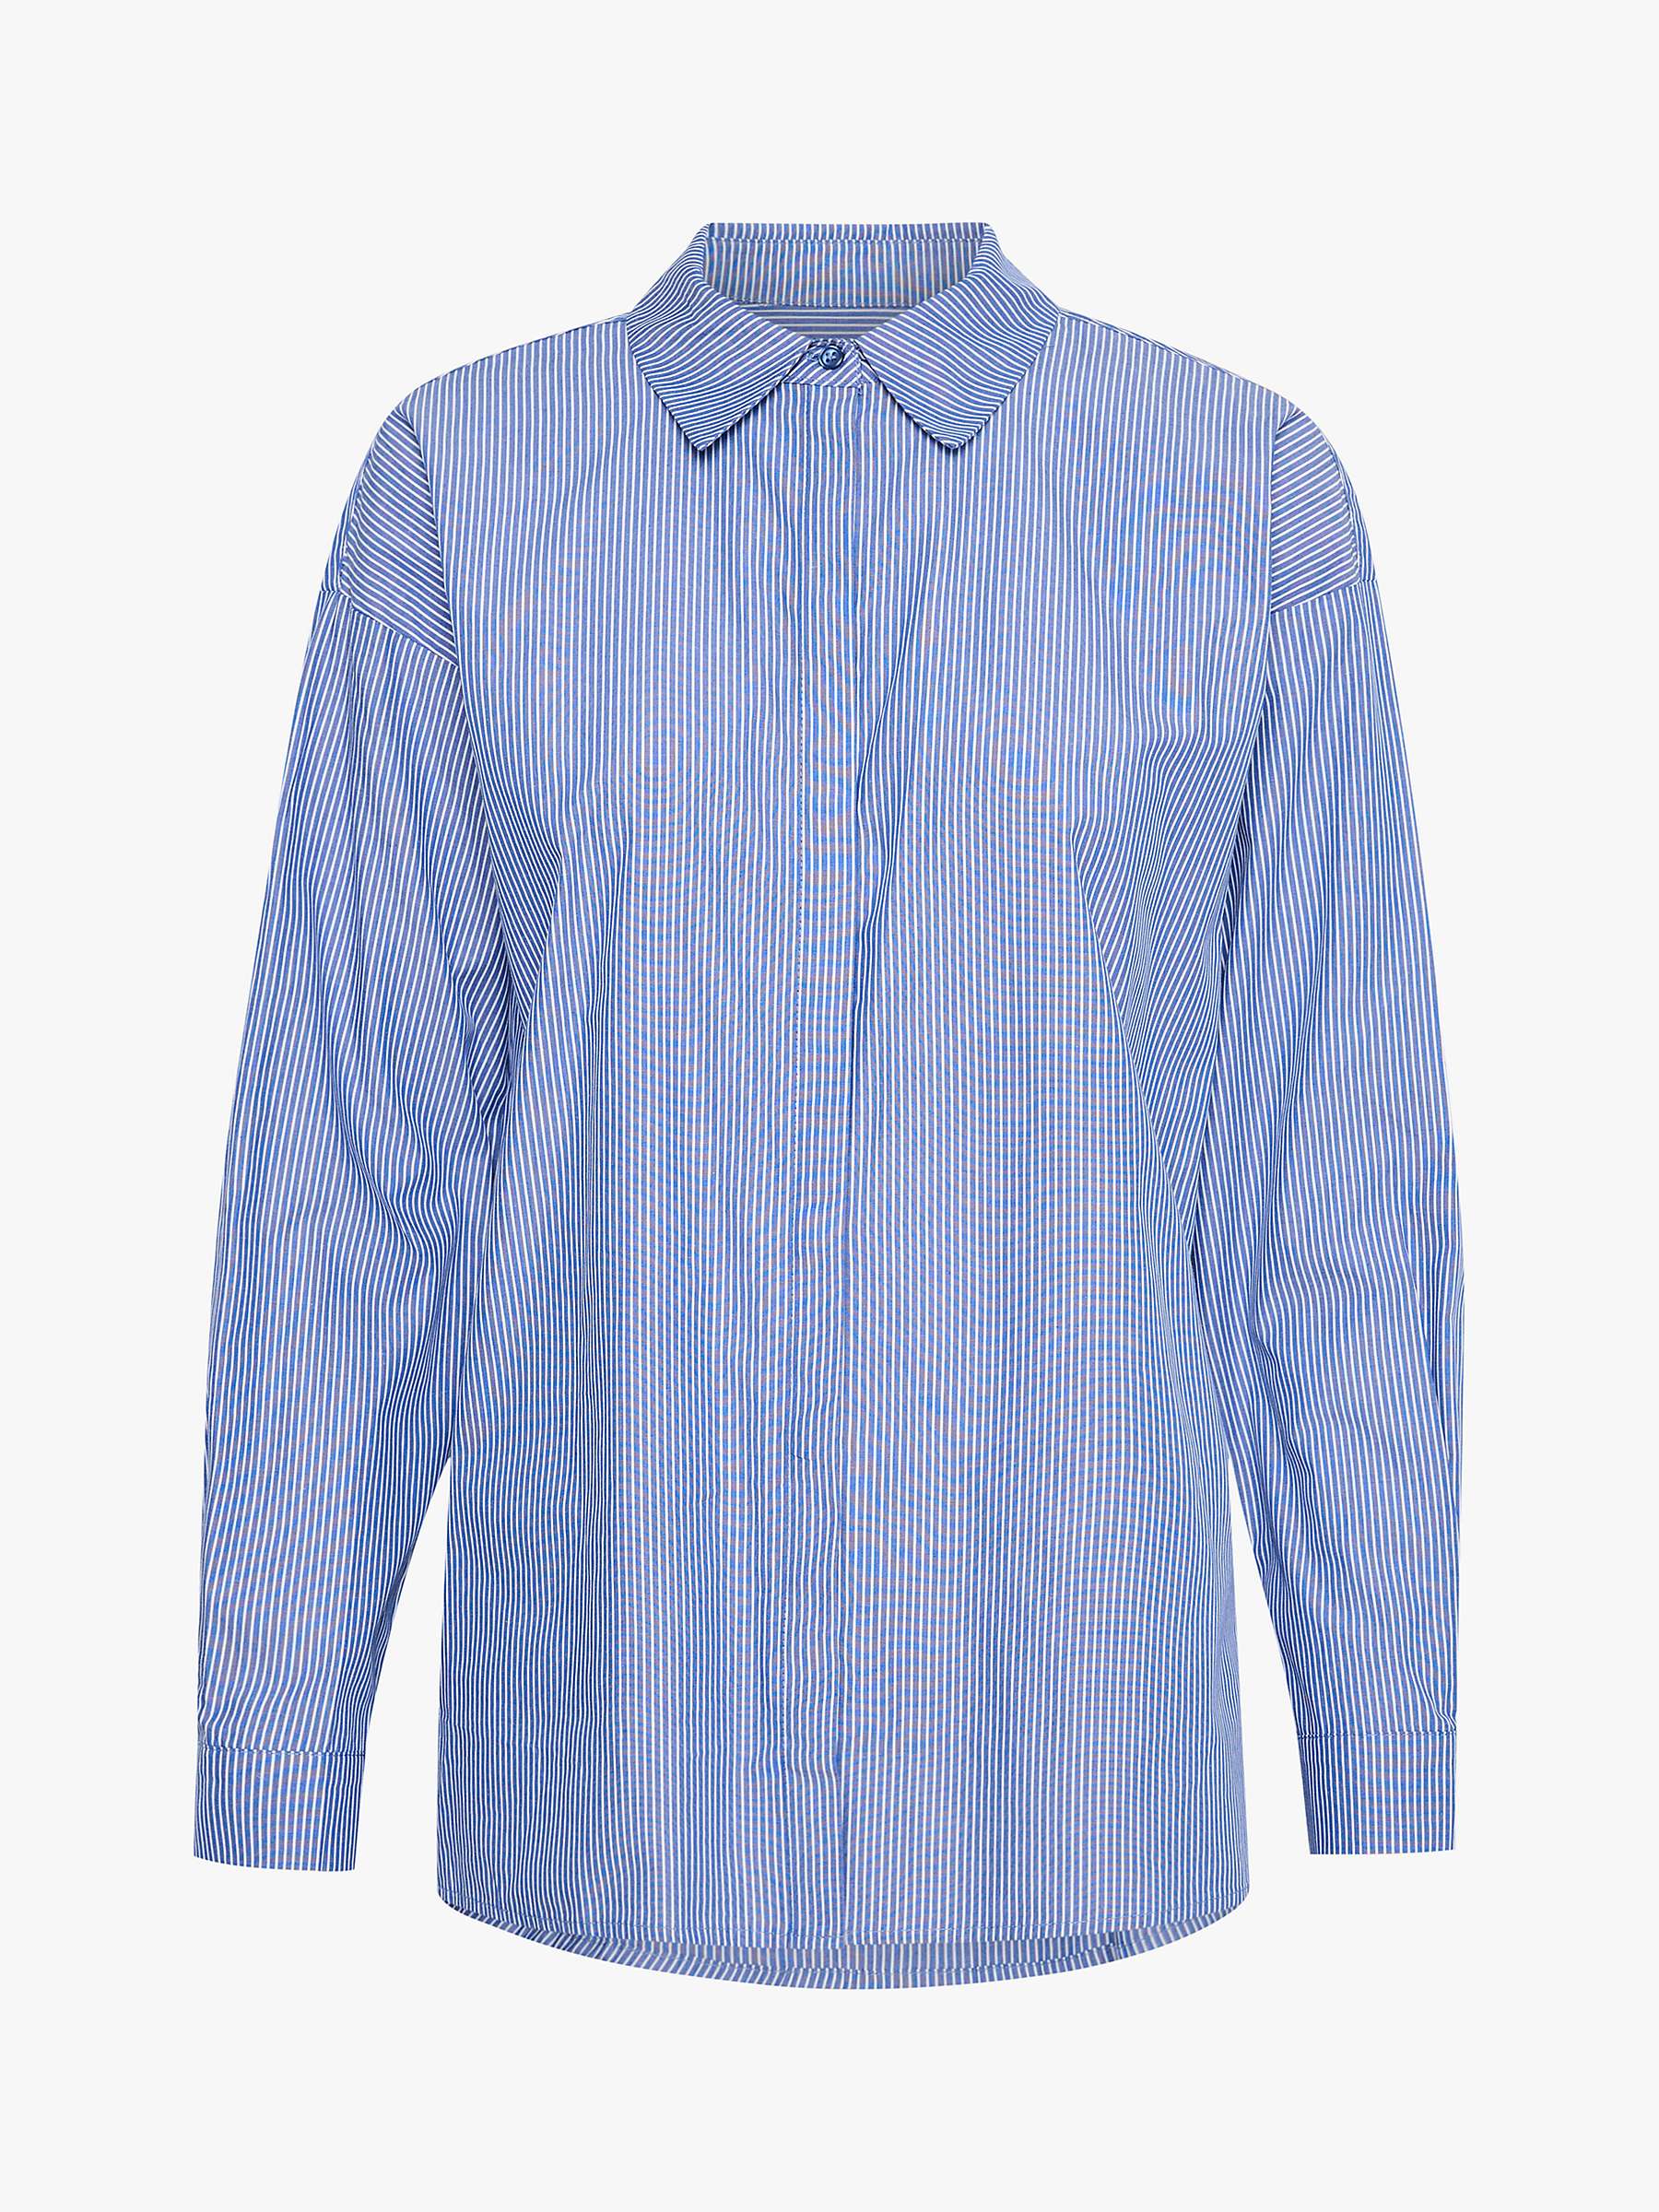 Buy MY ESSENTIAL WARDROBE Button Up Casual Fit Cotton Shirt, Medium Blue Online at johnlewis.com